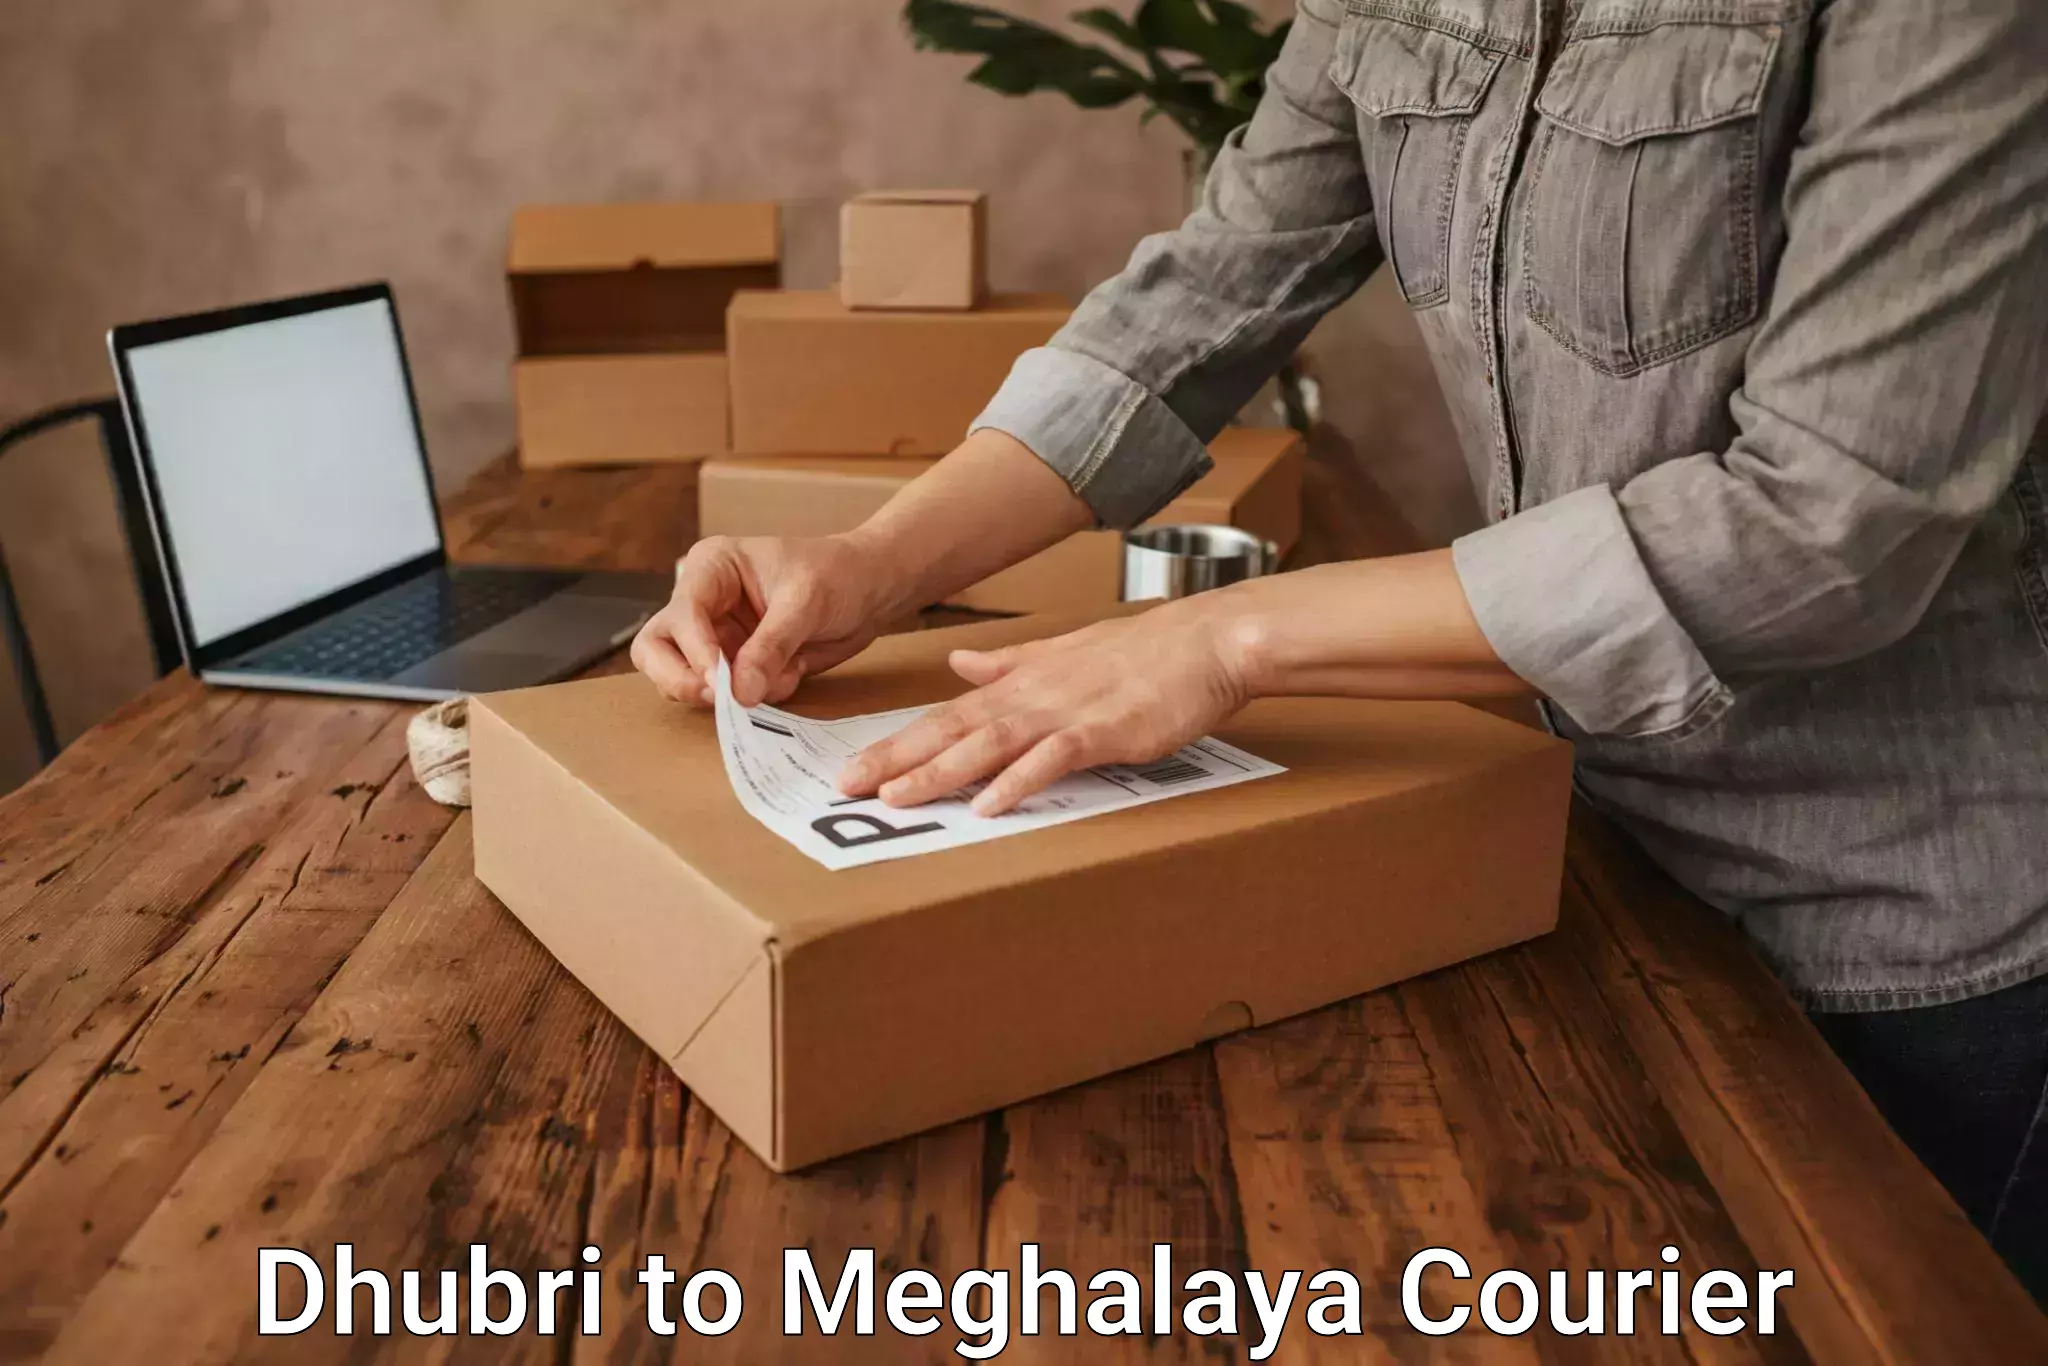 Professional courier handling Dhubri to Shillong